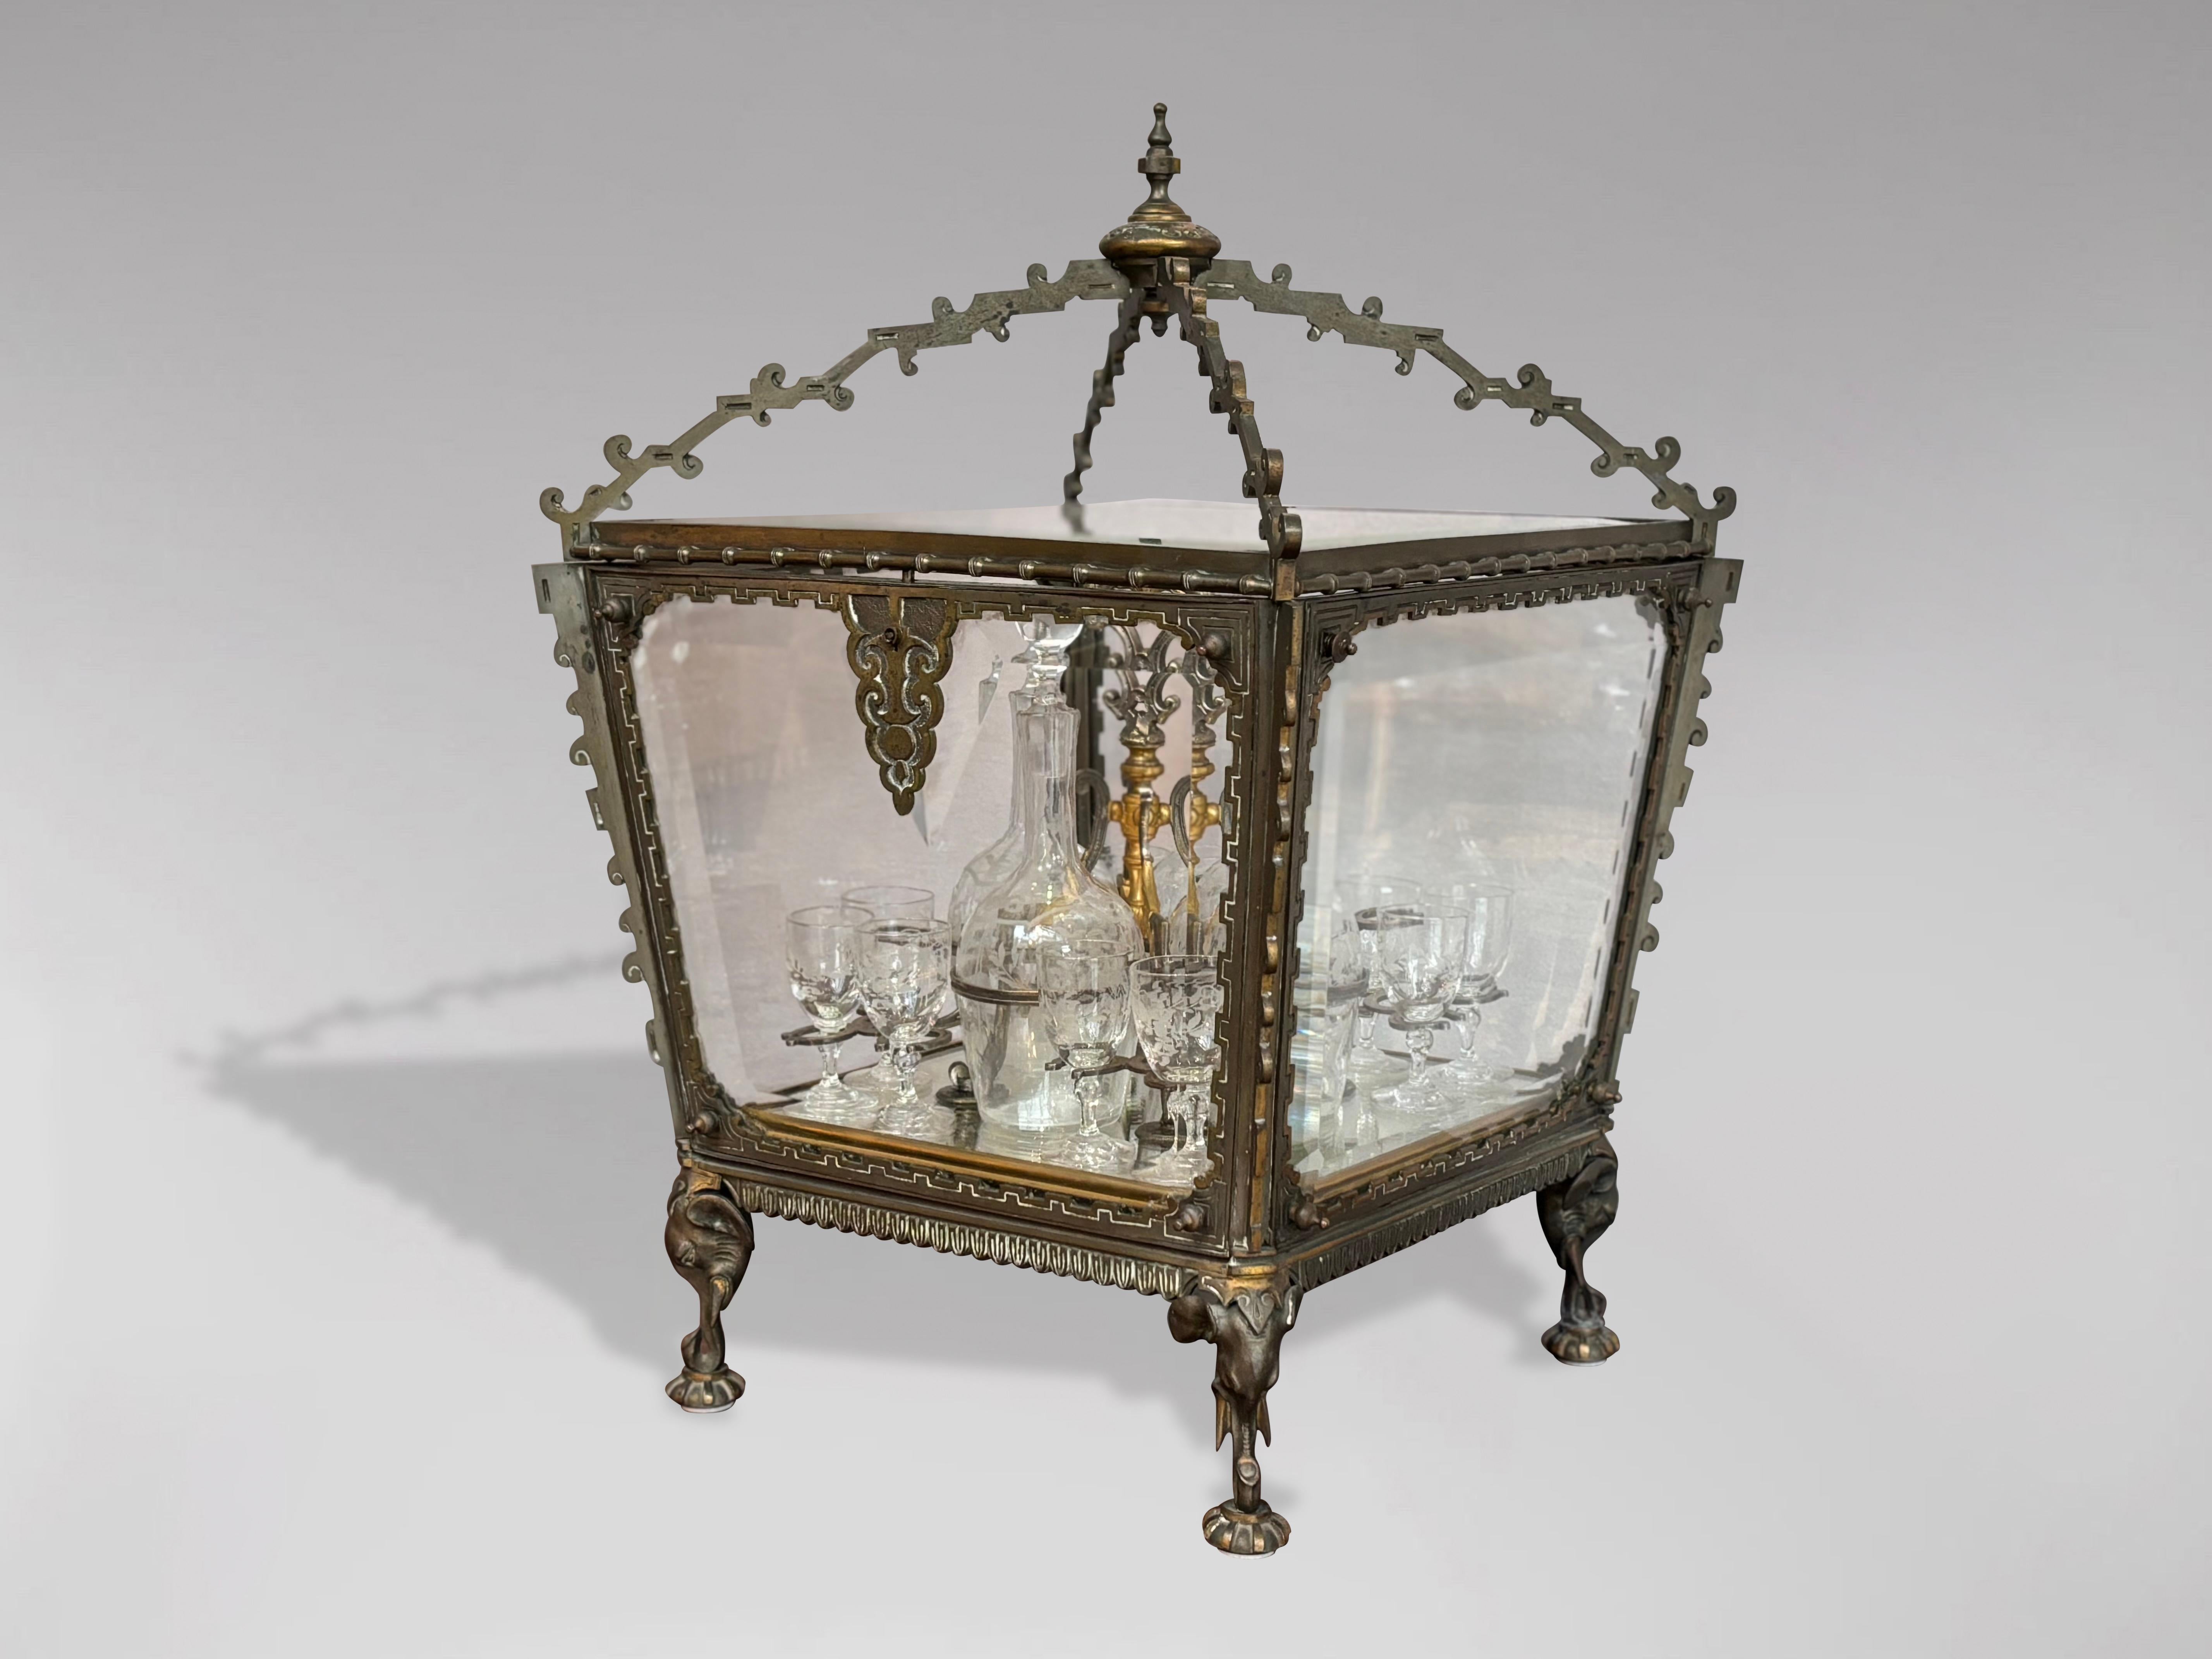 A fabulous French 19th century colonial, ormolu and bevelled glass cave à liqueur. The decorative case has bevelled glass panels on all sides and top, raised on 4 legs with sculptured elephant heads. The original beveled glass sides and top are also